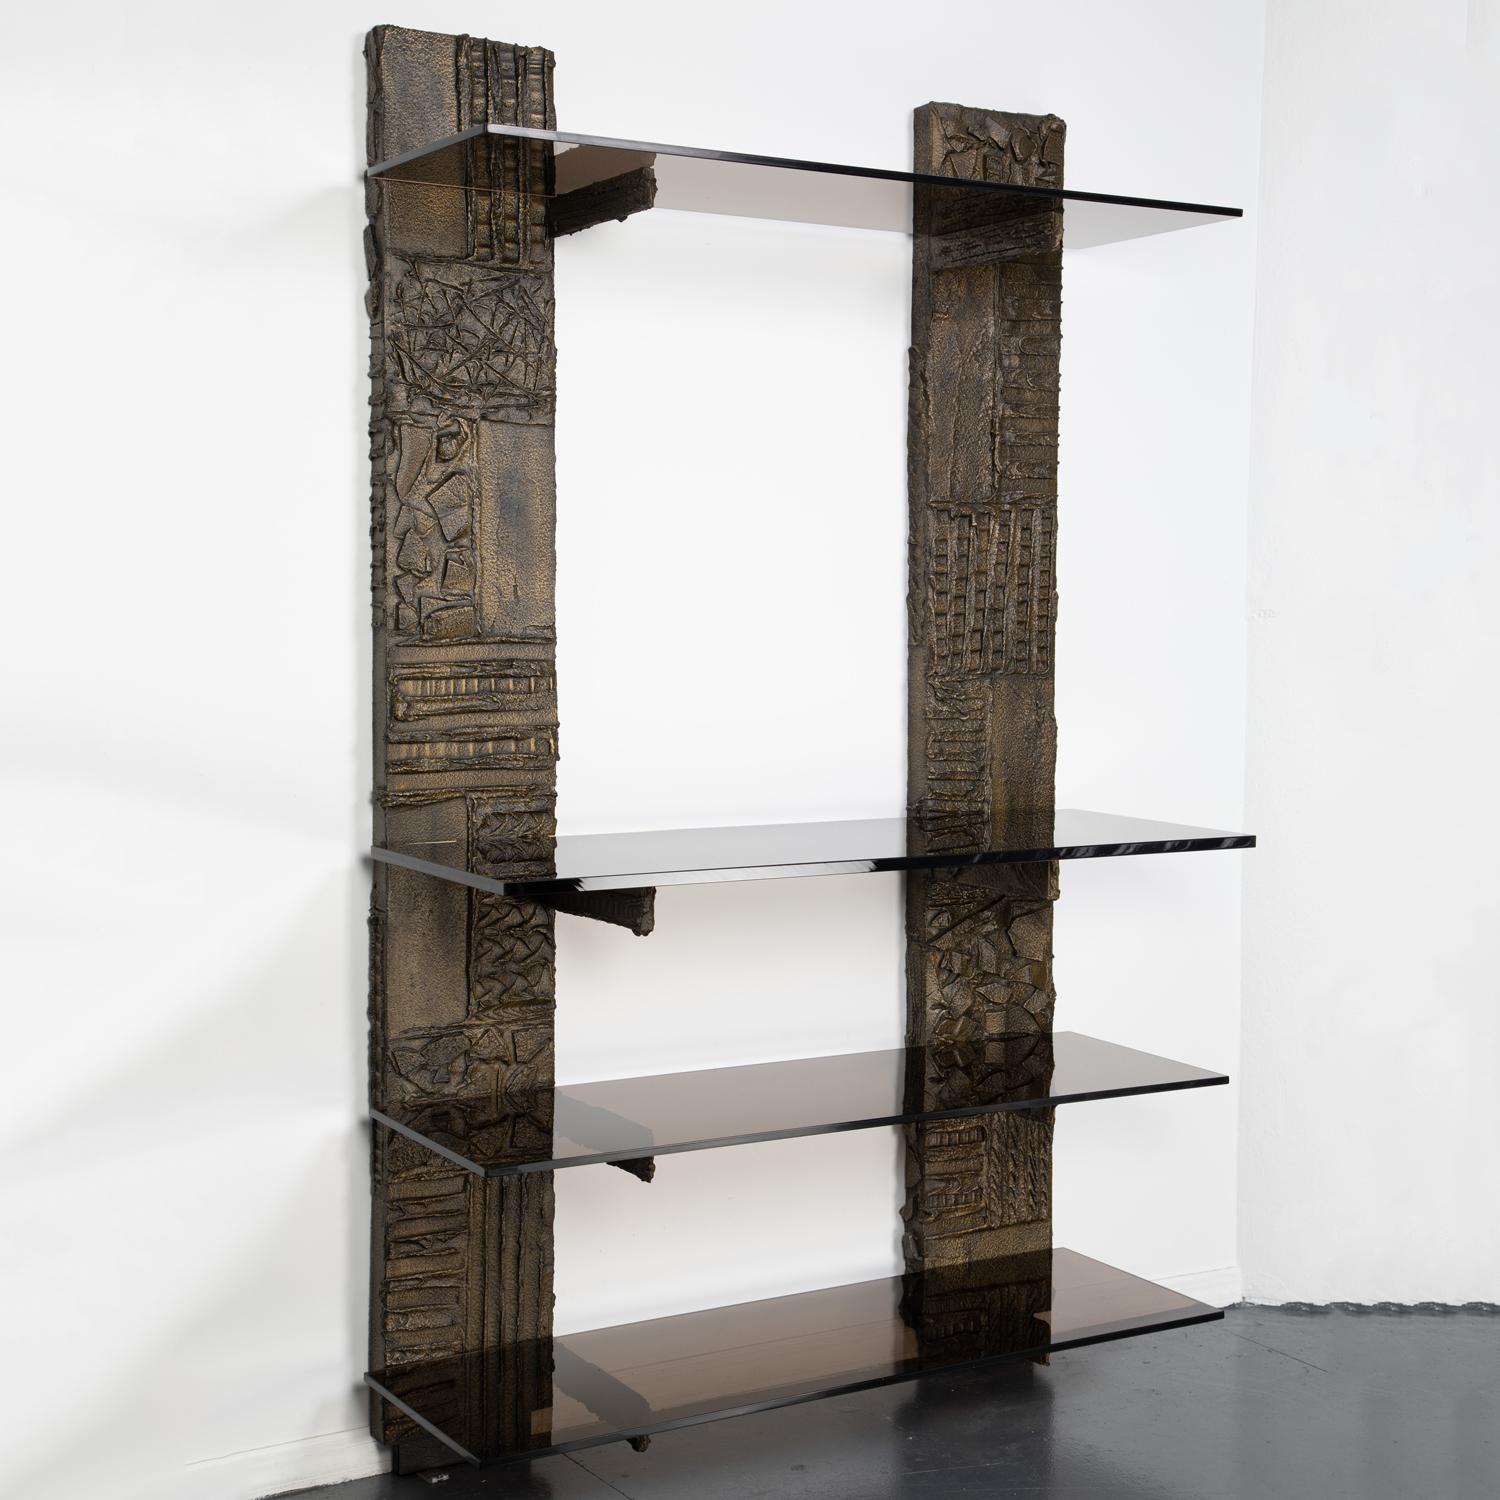 Wall unit with 2 pilasters in sculpted bronze resin and smoked glass shelves by Paul Evans, American 1974 (signed 